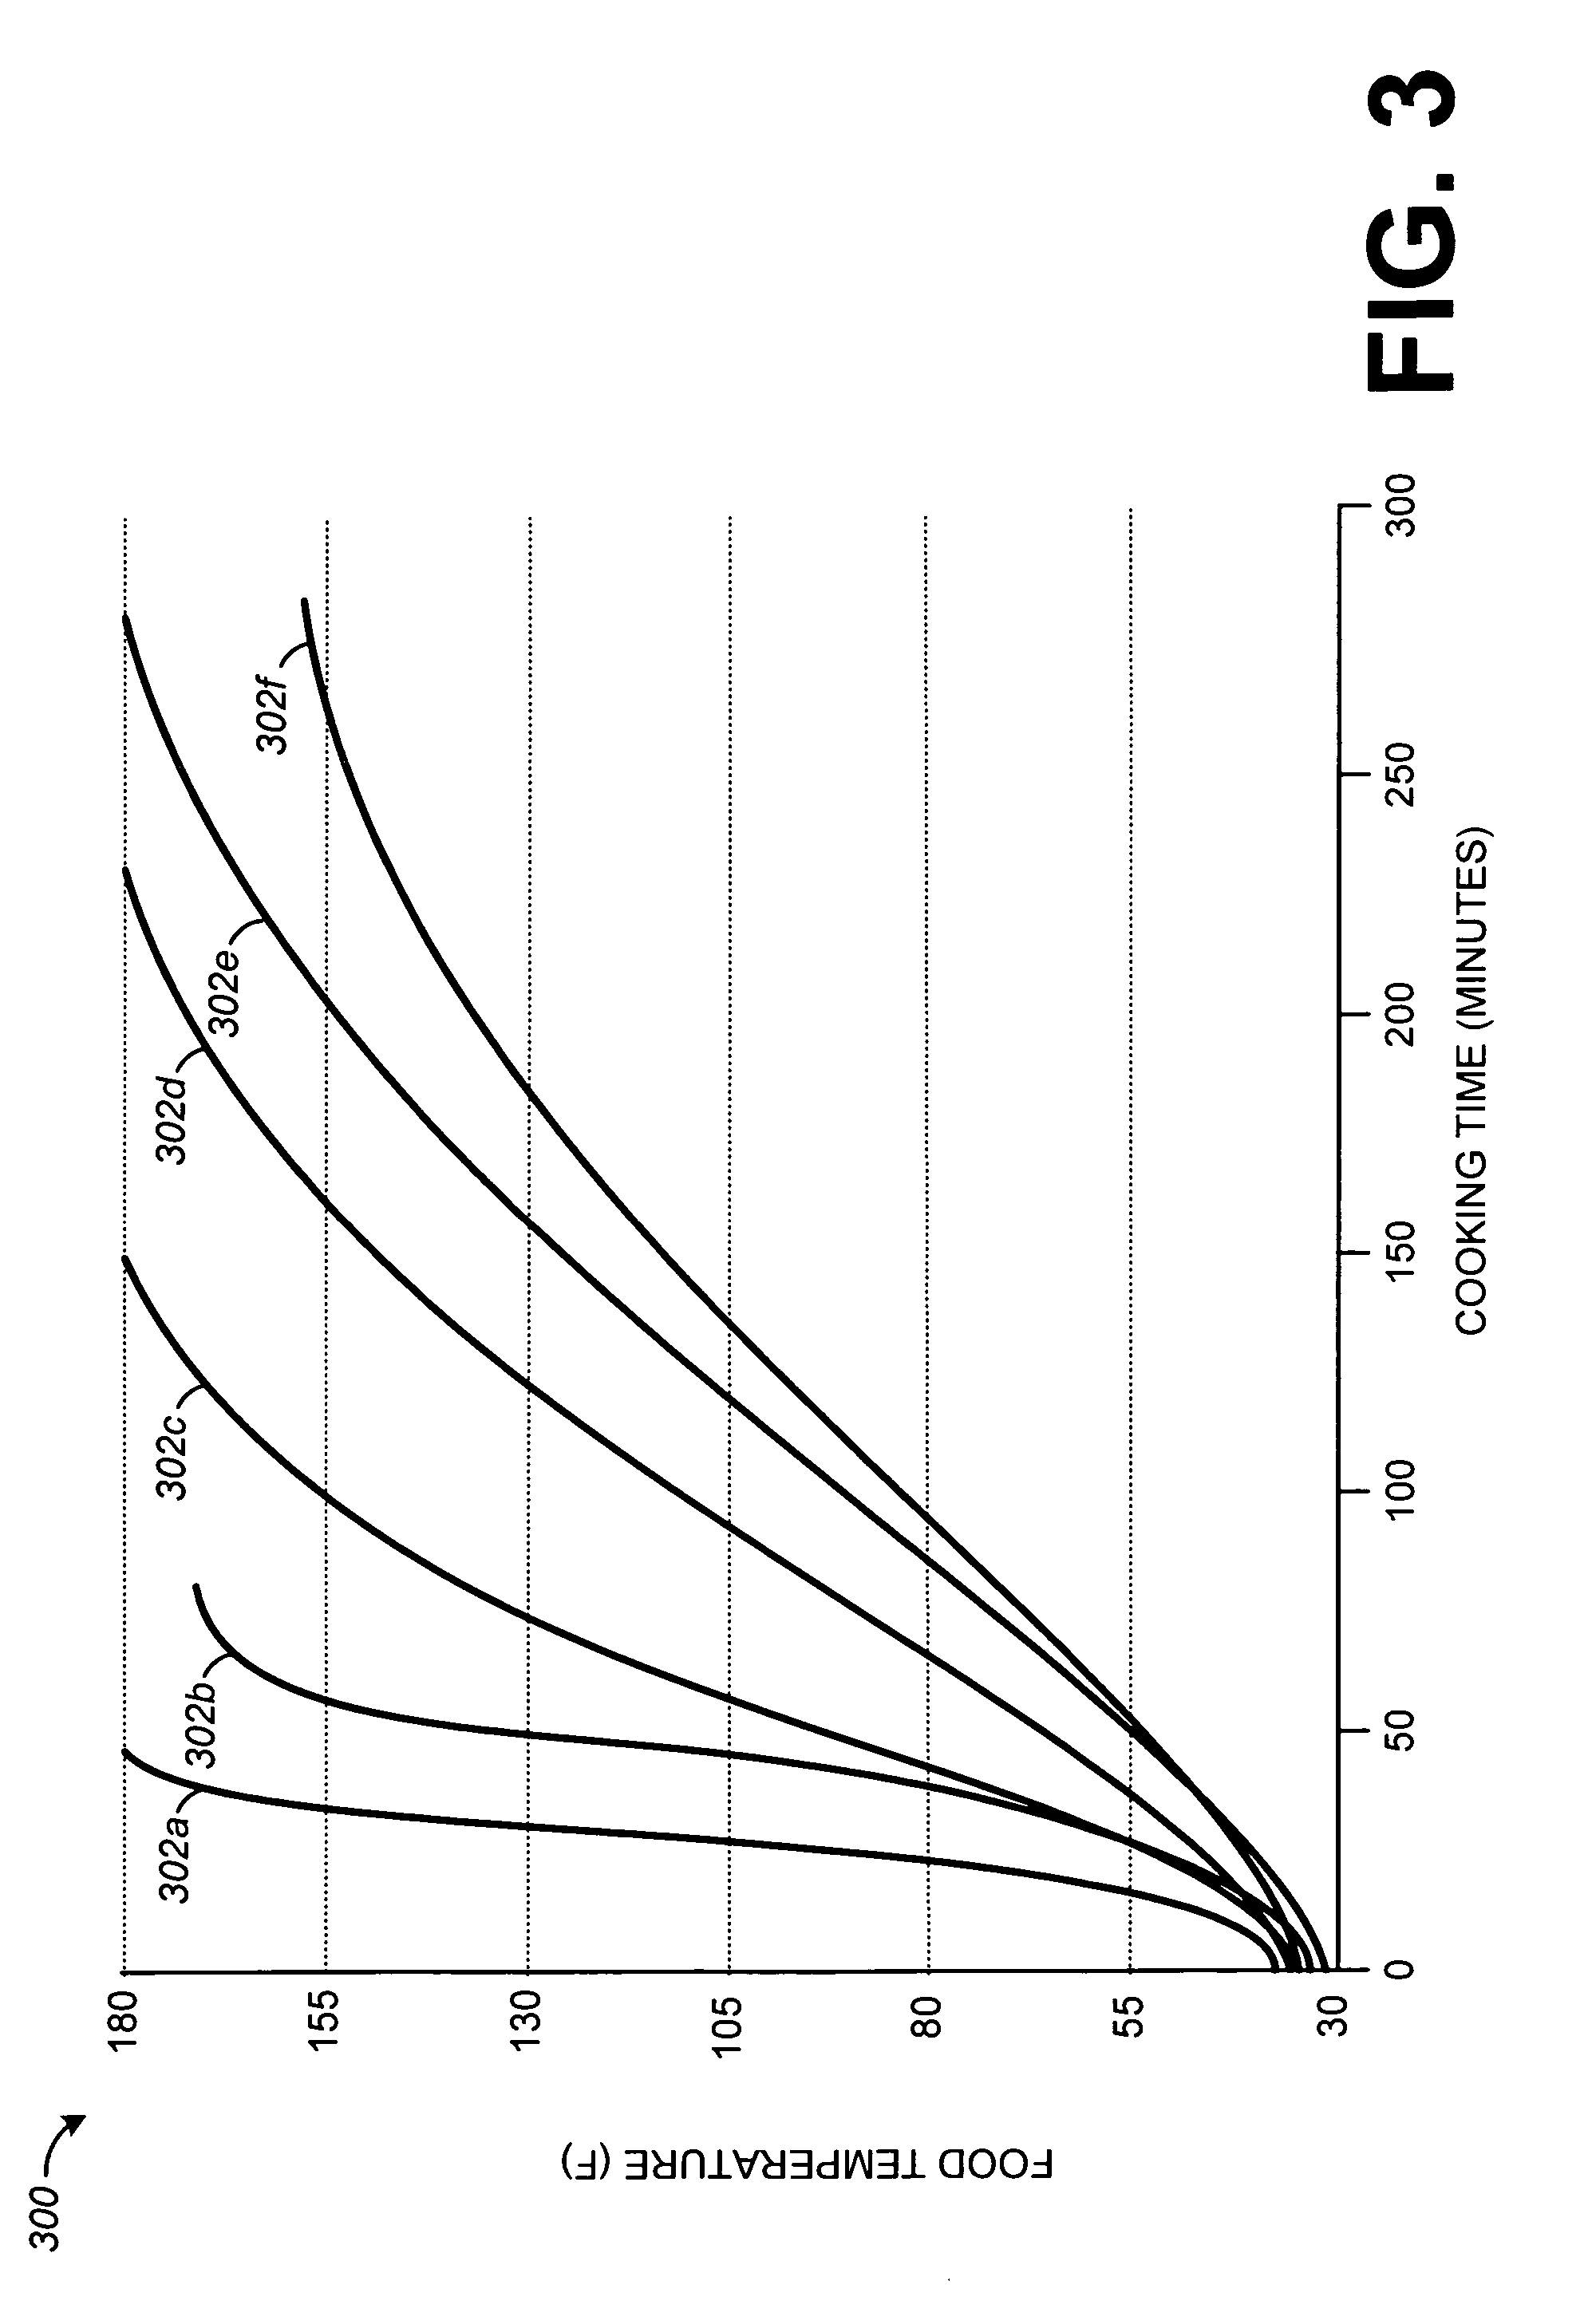 Systems and methods for predicting the time to change the temperature of an object